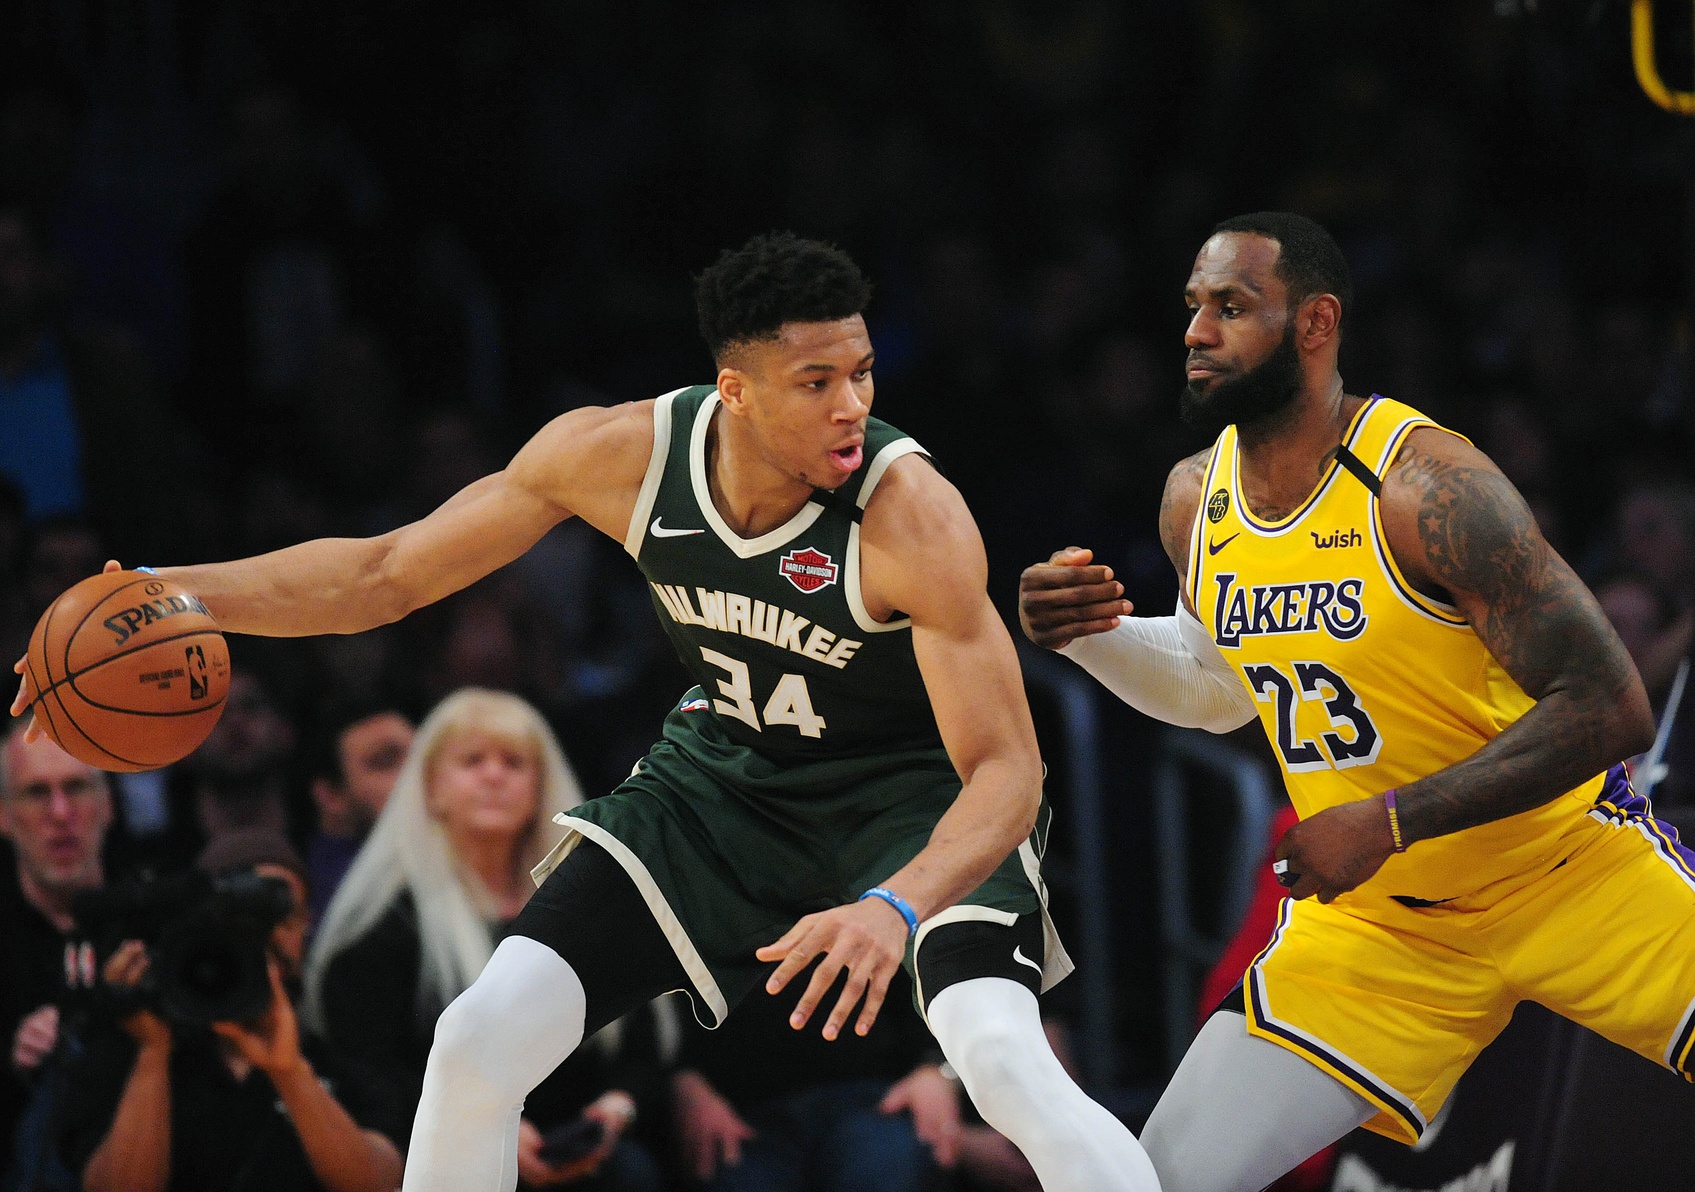 March 6, 2020; Los Angeles, California, USA; Milwaukee Bucks forward Giannis Antetokounmpo (34) controls the ball against Los Angeles Lakers forward LeBron James (23) during the first half at Staples Center. Mandatory Credit: Gary A. Vasquez-USA TODAY Sports